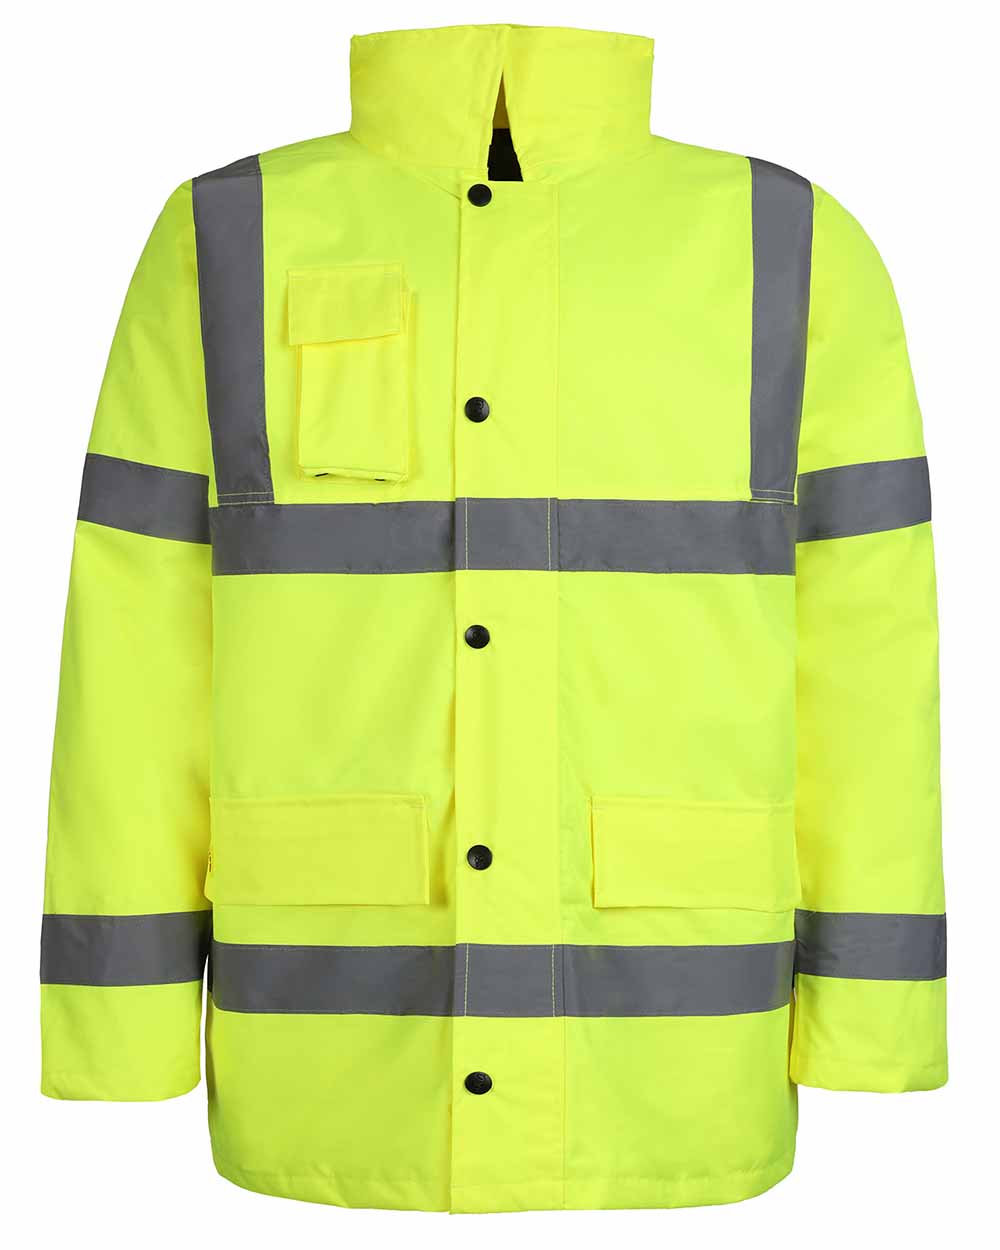 Fort Workwear Quilted Jacket in hi vis yellow 